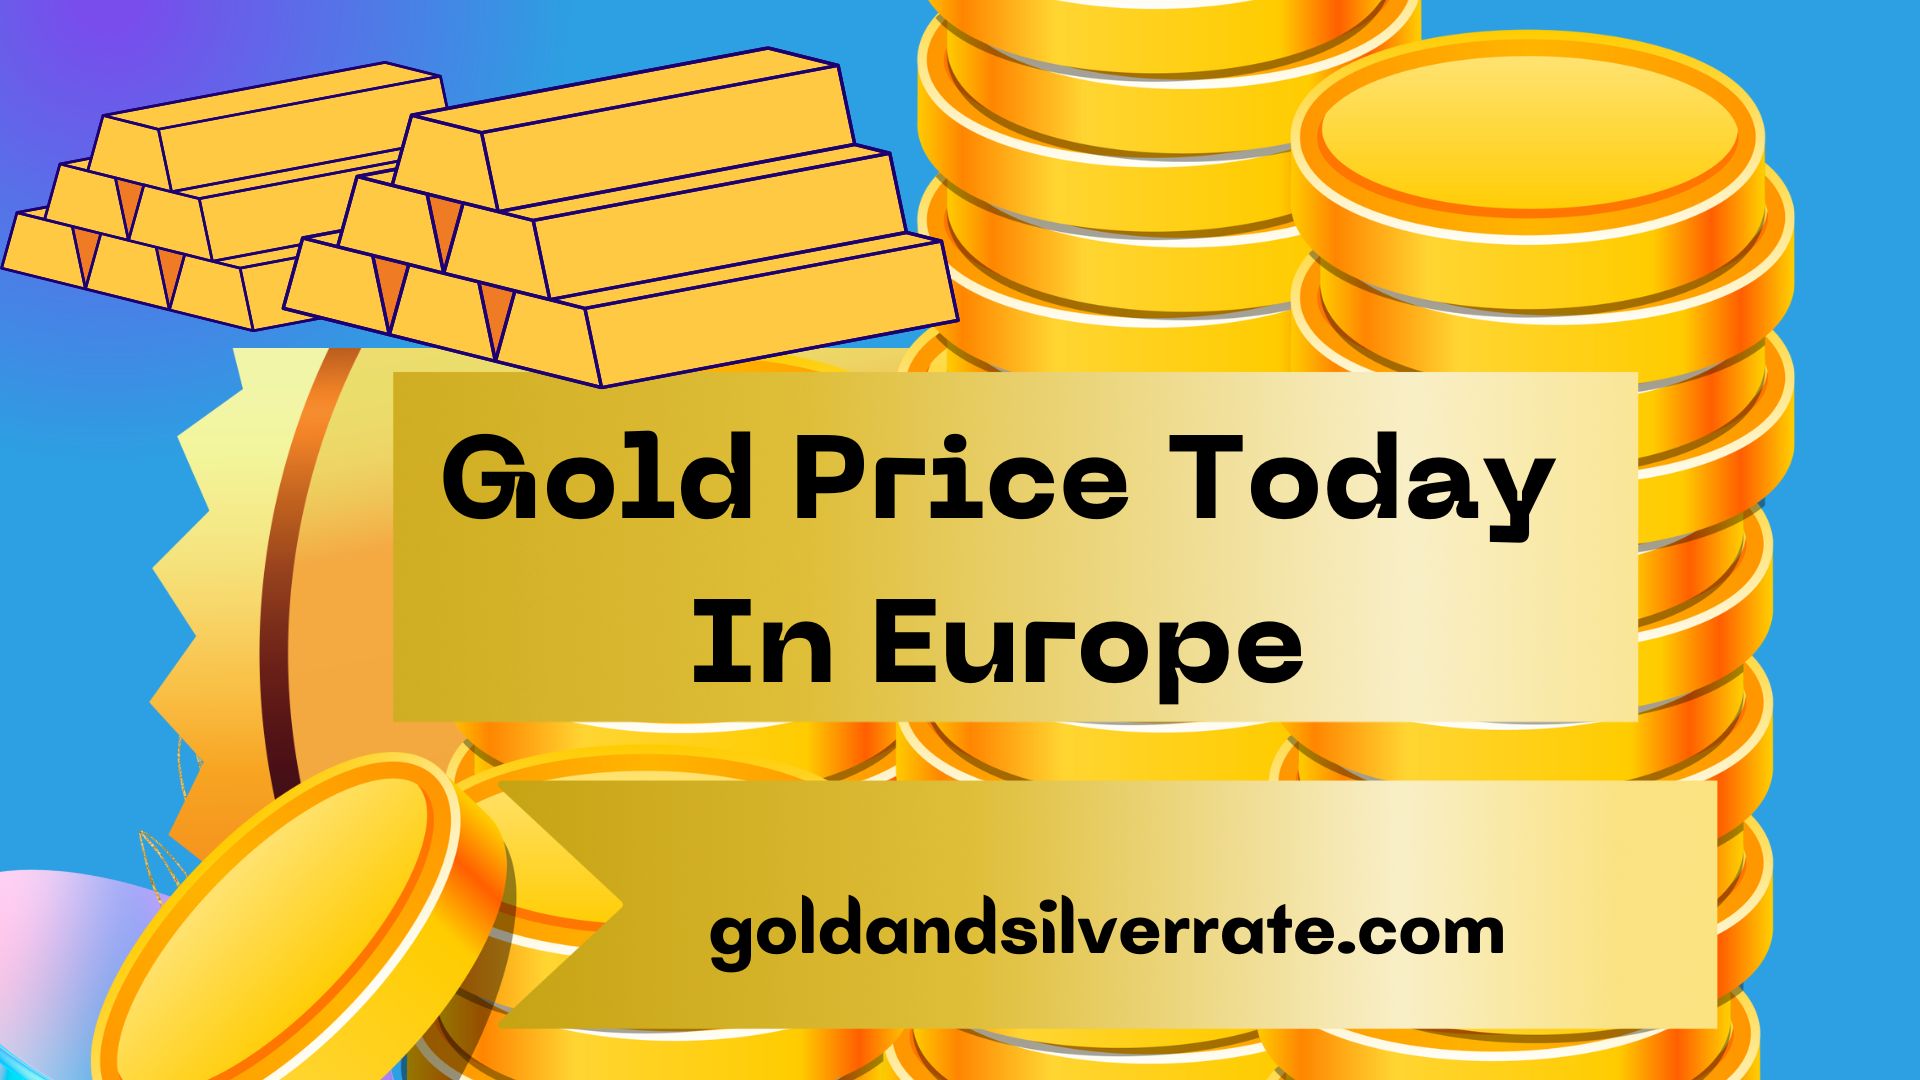 GOLD PRICE TODAY IN EUROPE